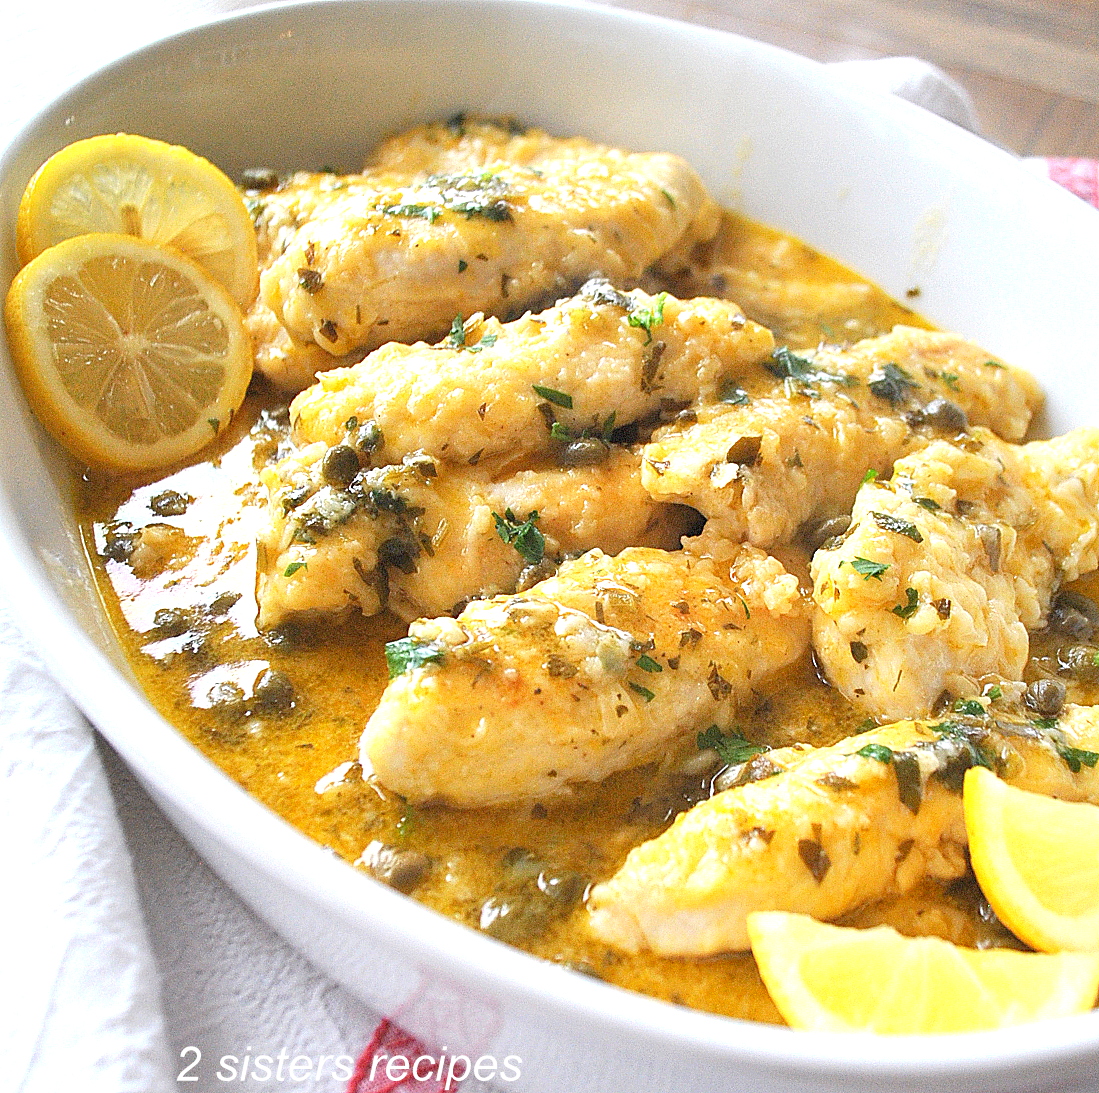 Chicken Tenders Smothered in Lemon and Parsley by 2sistersrecipes.com